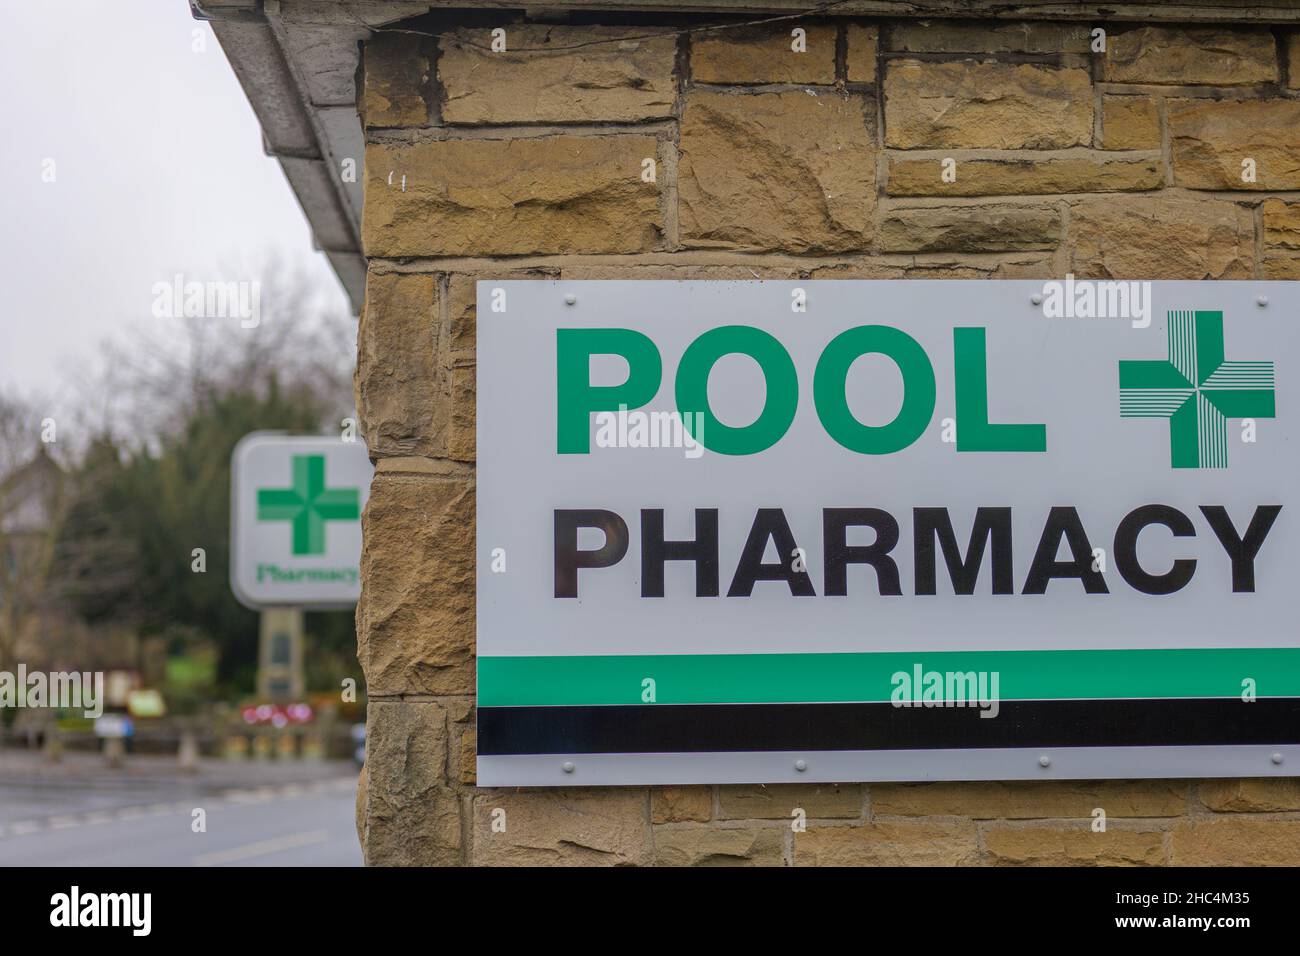 A chemist called Pool Pharmacy in the village of Pool-in-Wharfedale Stock Photo